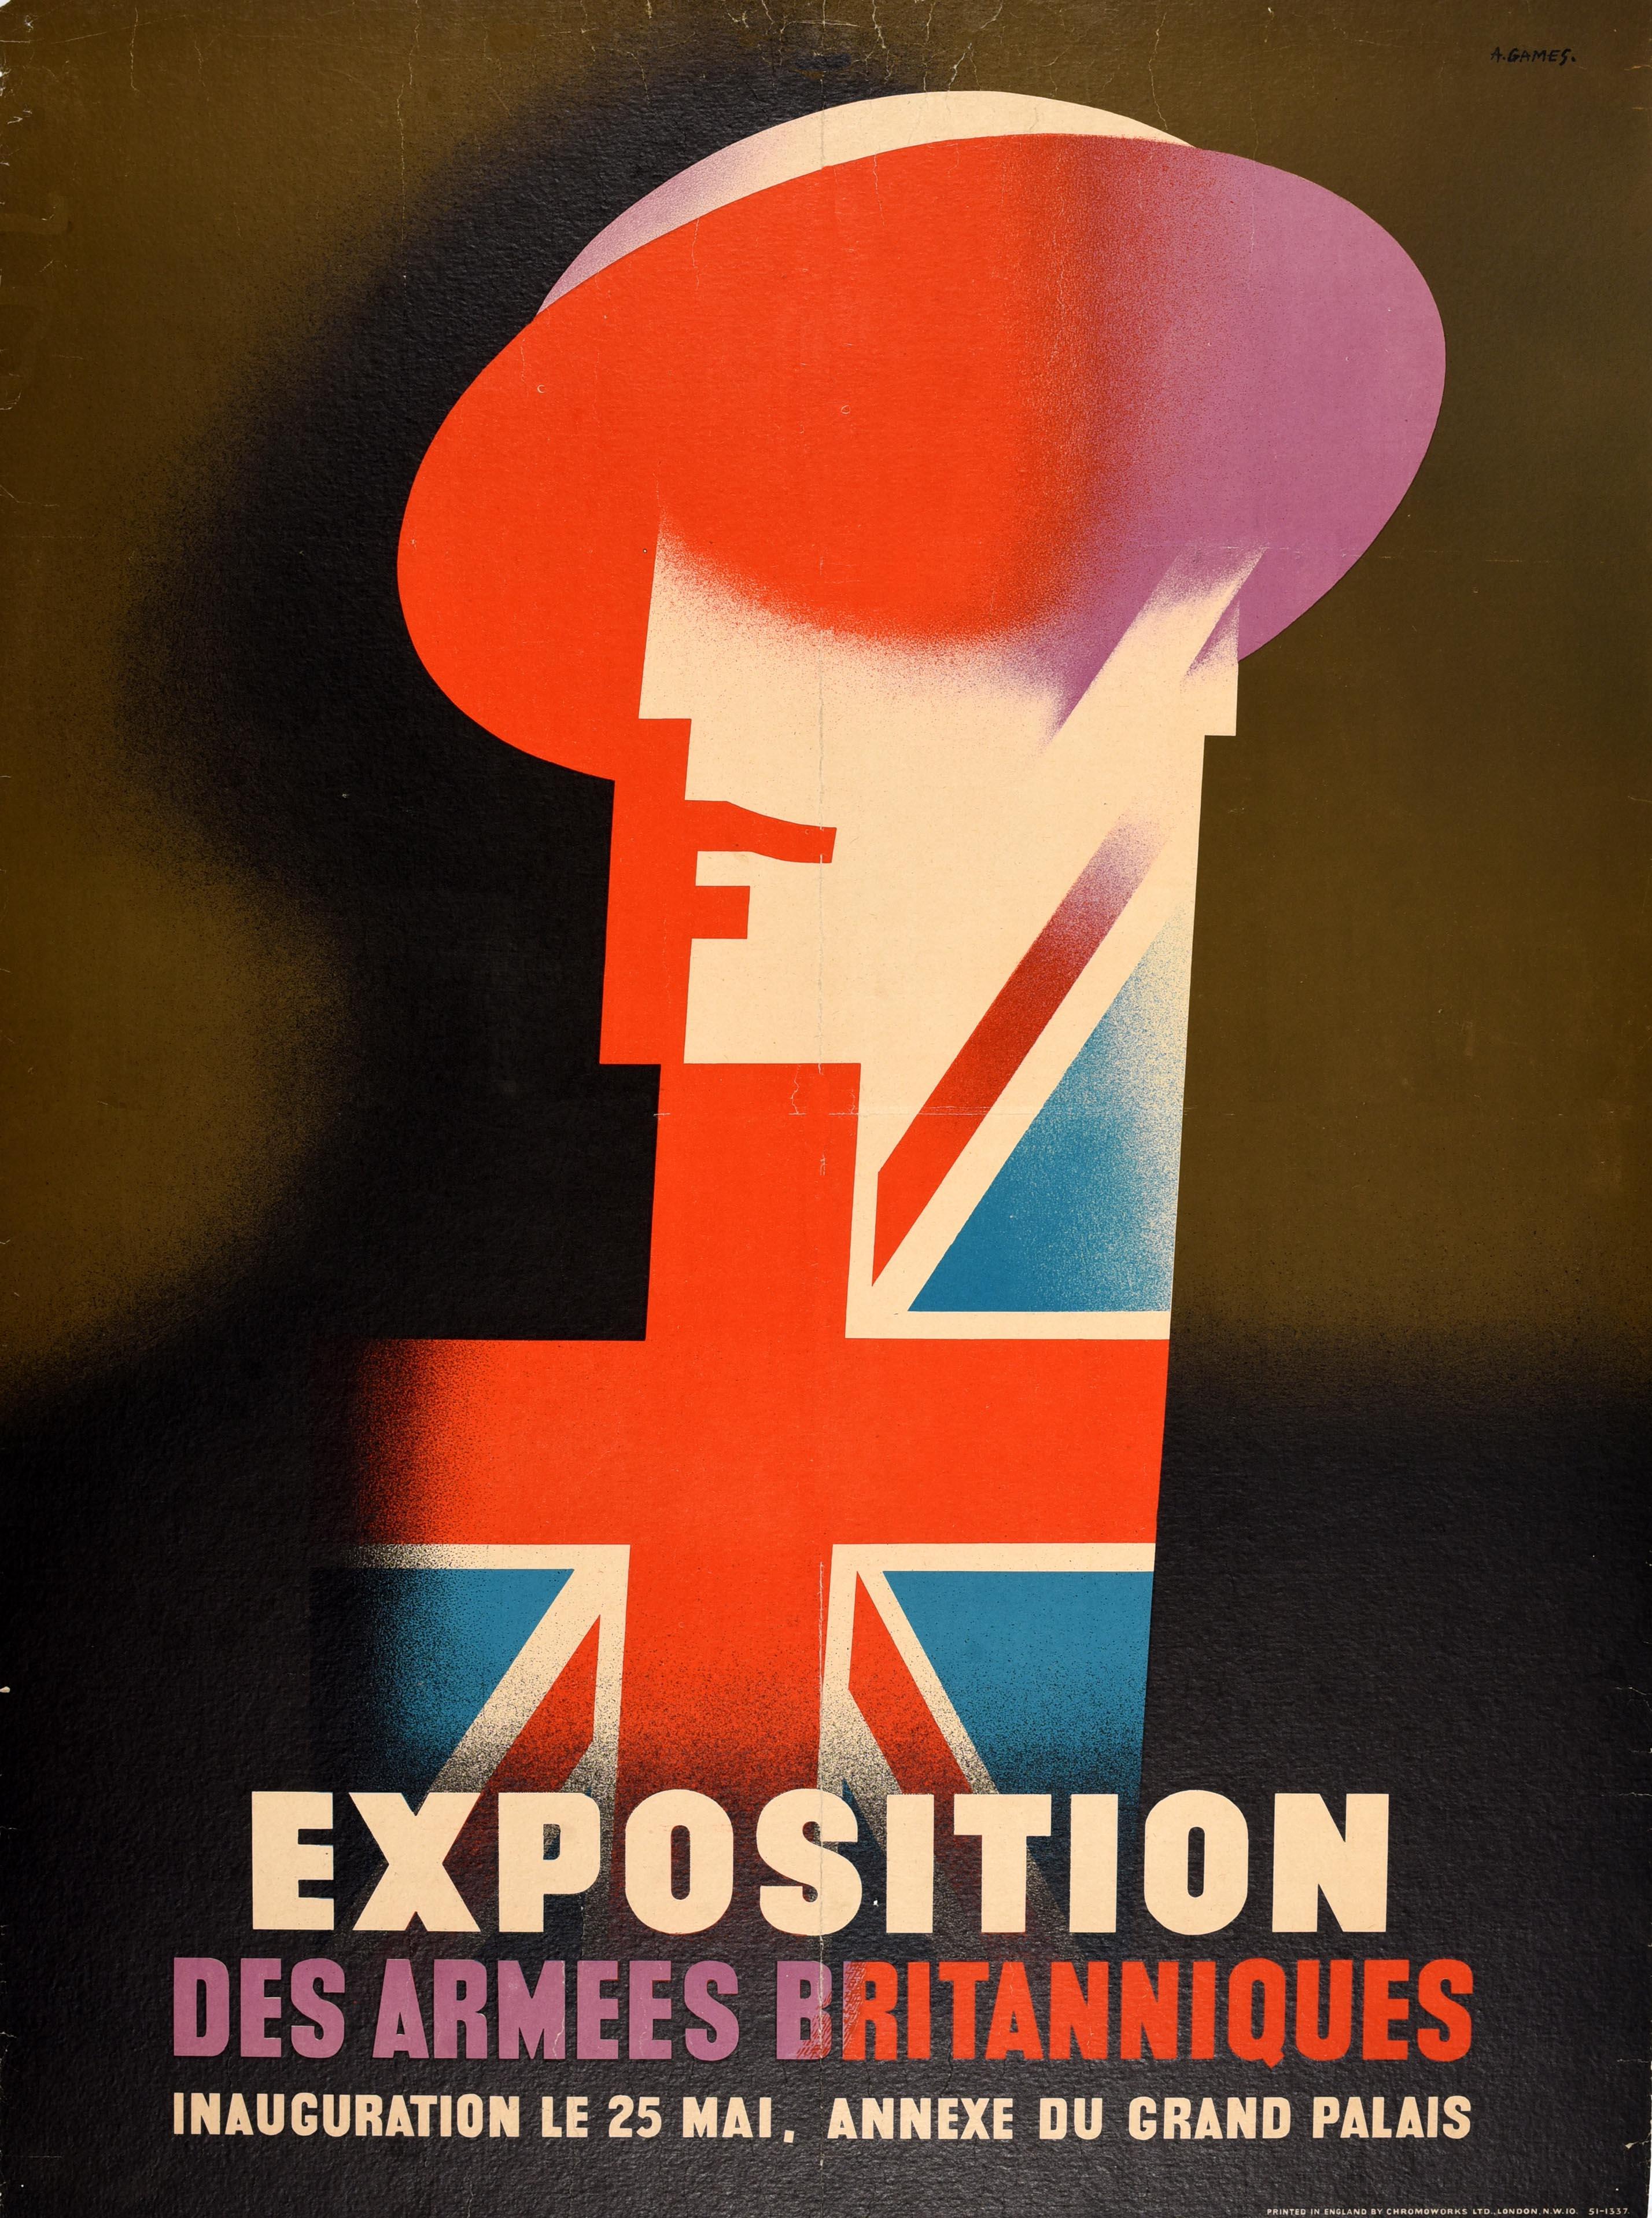 Original vintage advertising poster for a British Army Exhibition on 25 May - Exposition Des Armees Britanniques Inauguration le 25 Mai Annexe du Grand Palais - featuring a great design by the notable British graphic designer Abram Games (Abraham